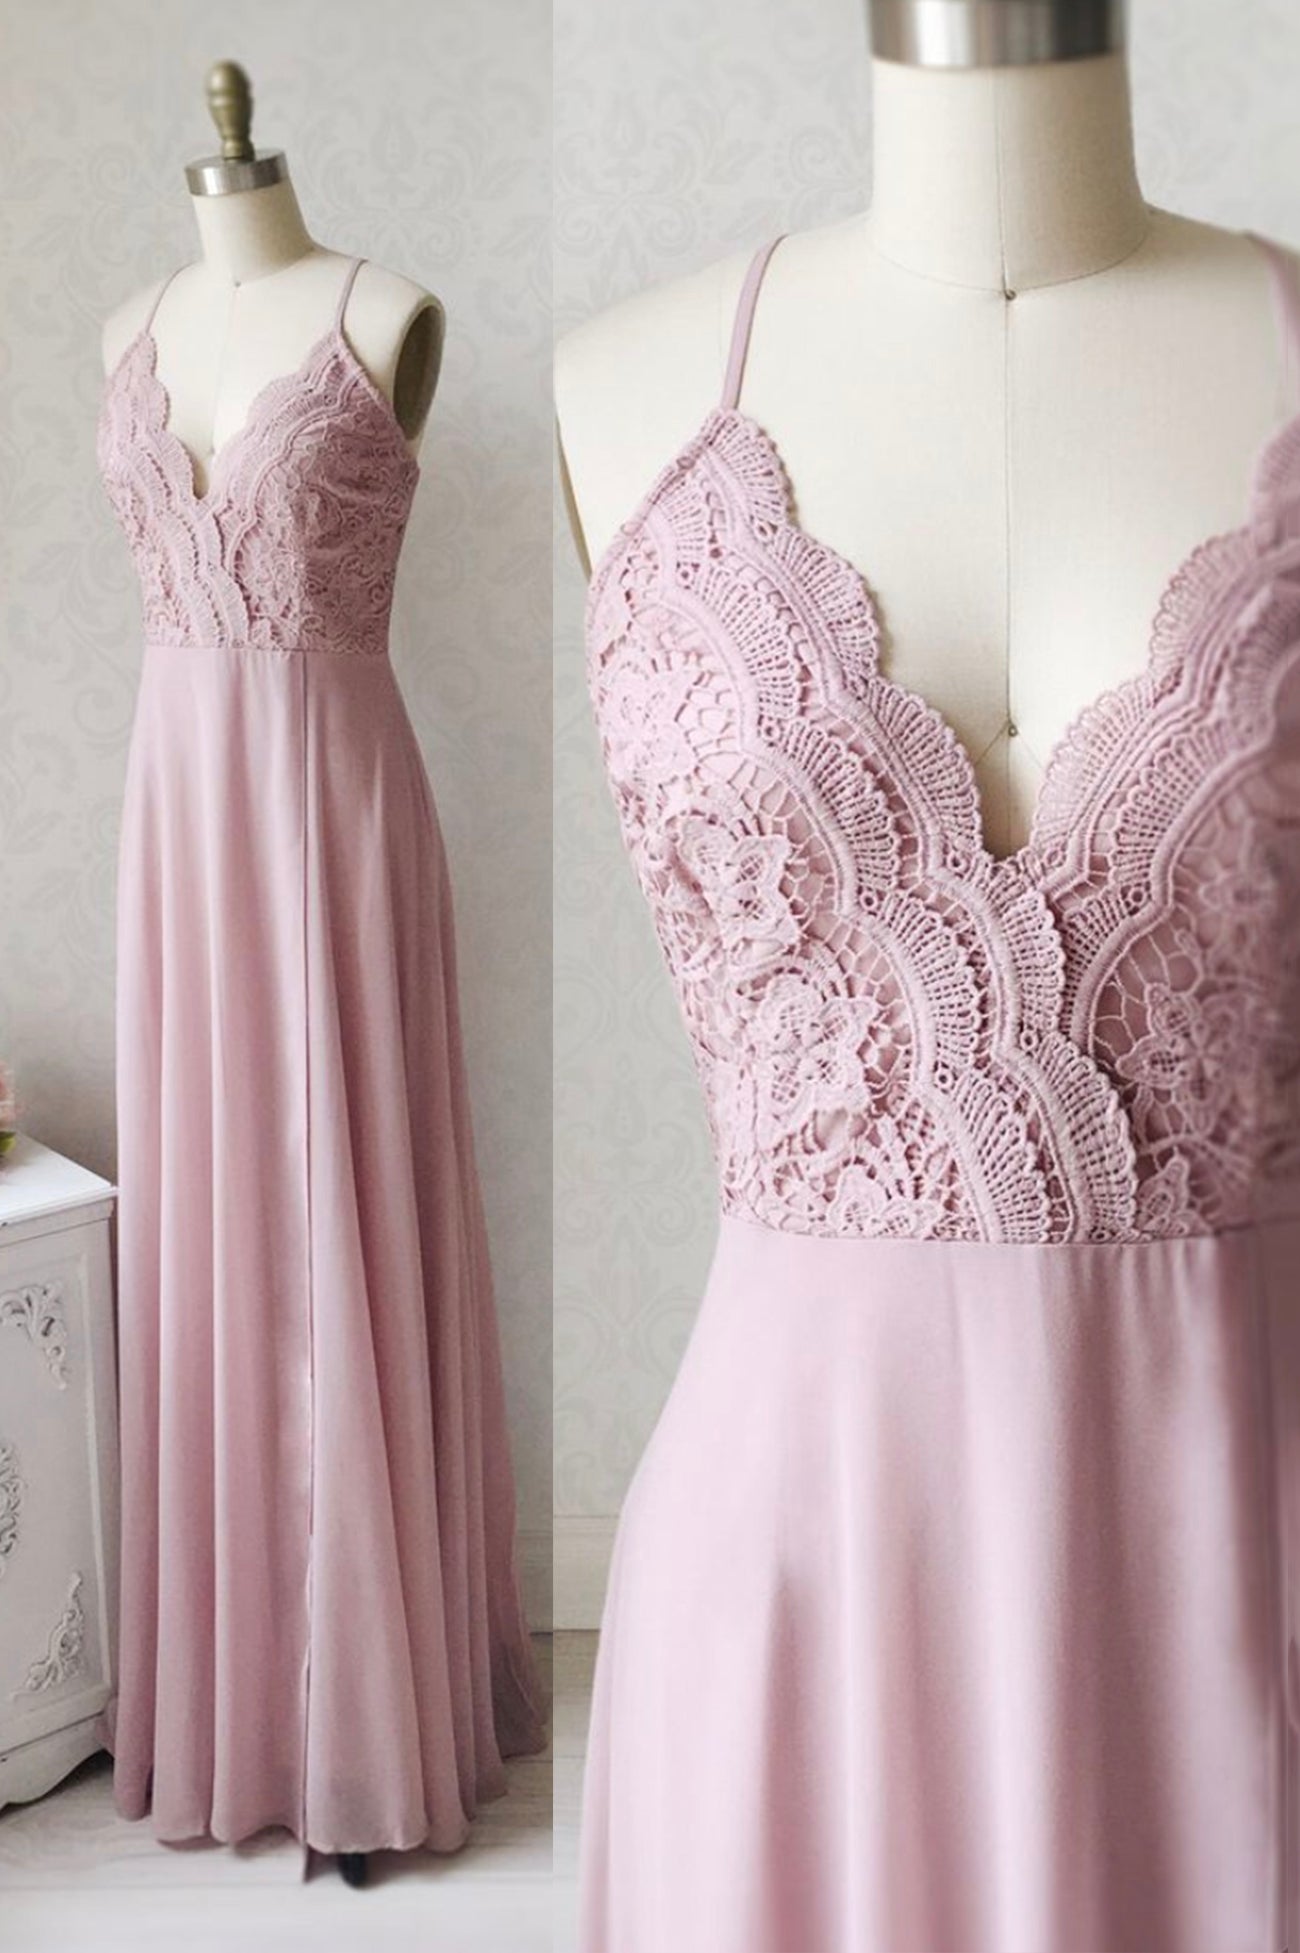 Pink Chiffon Lace Long Corset Prom Dresses, V-Neck Spaghetti Strap Party Dresses outfit, Bridesmaid Dresses White